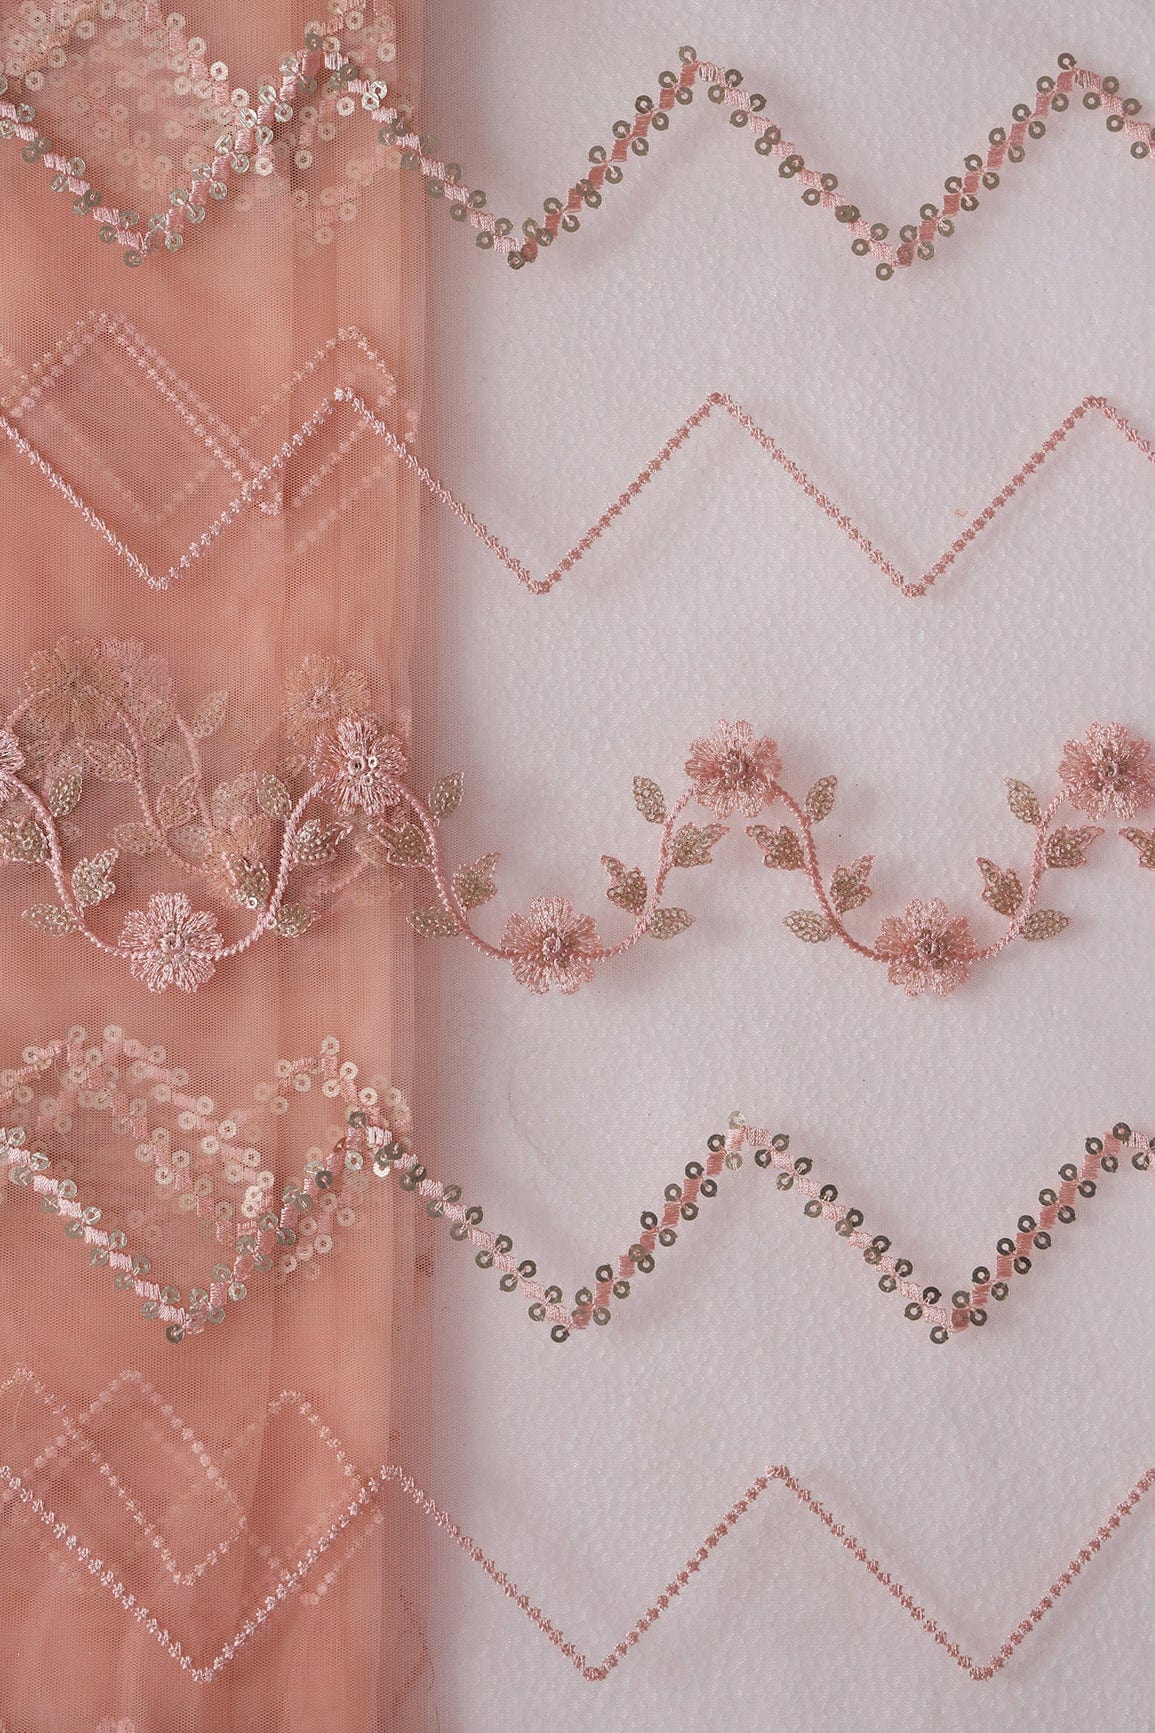 3.50 Meter Cut Piece Of Gold Sequins With Peach Thread Chevron Embroidery Work On Peach Soft Net Fabric - doeraa